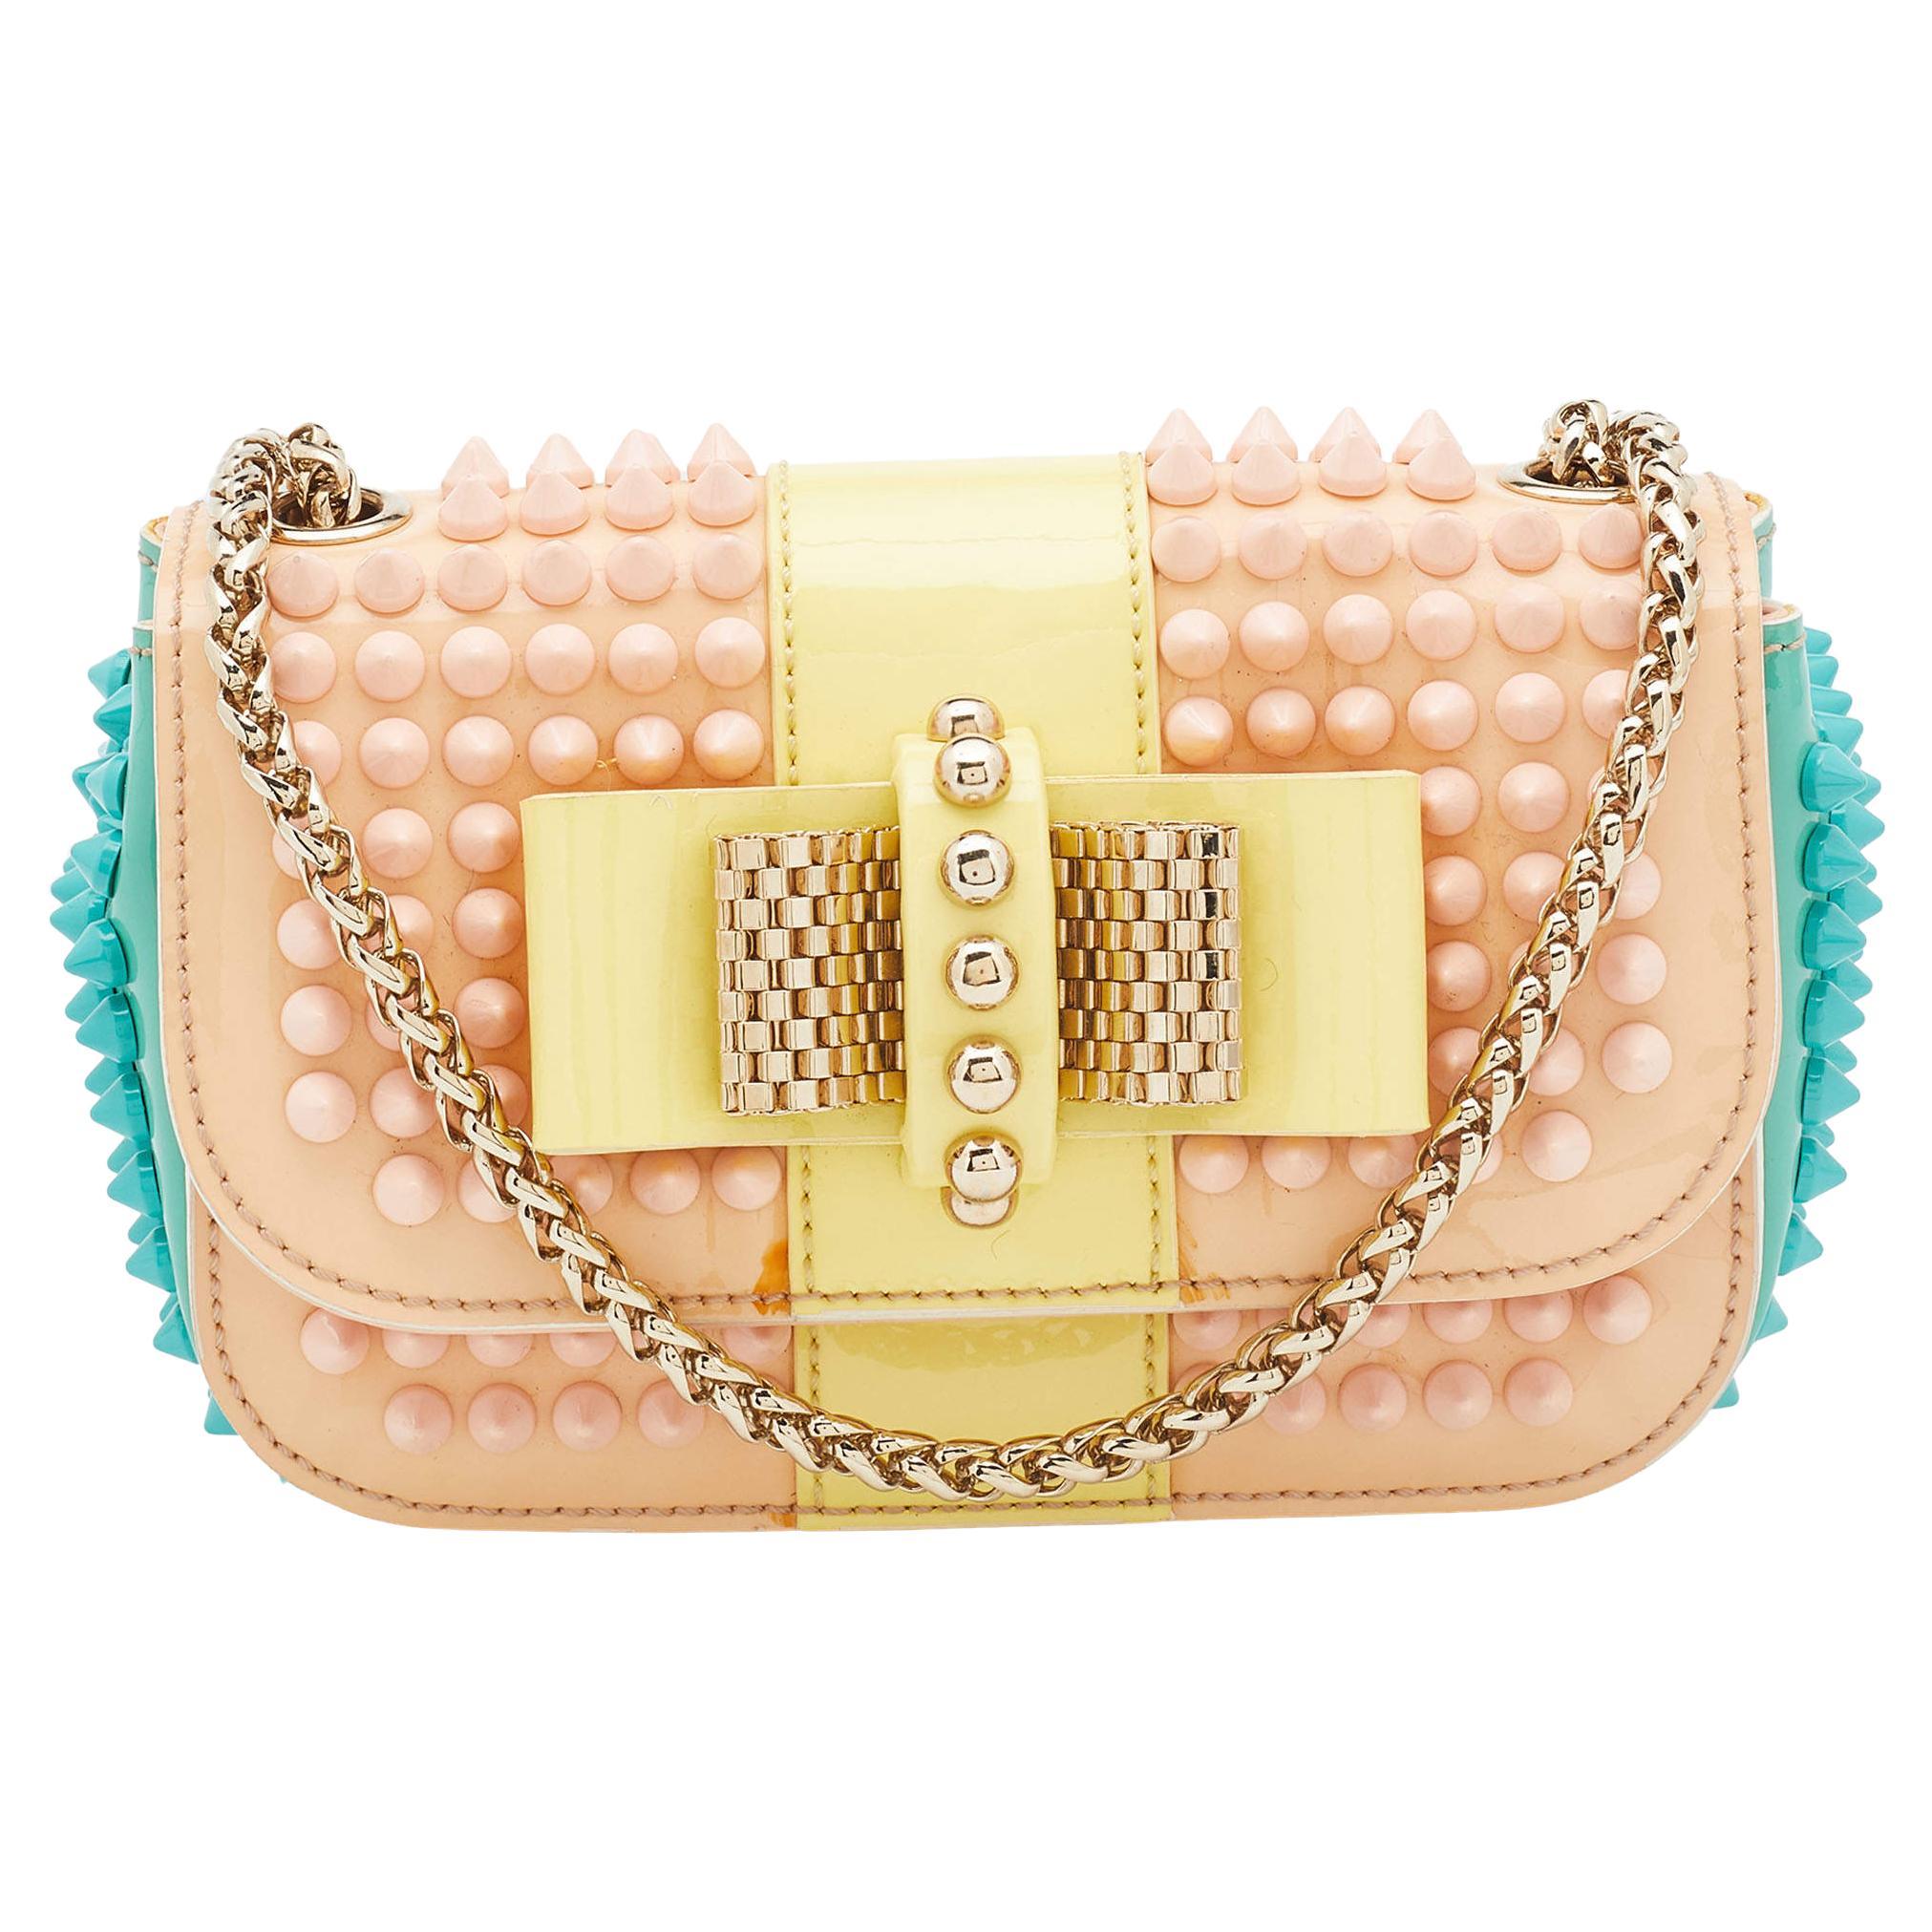 Christian Louboutin Patent Leather Mini Spiked Sweet Charity Crossbody Bag